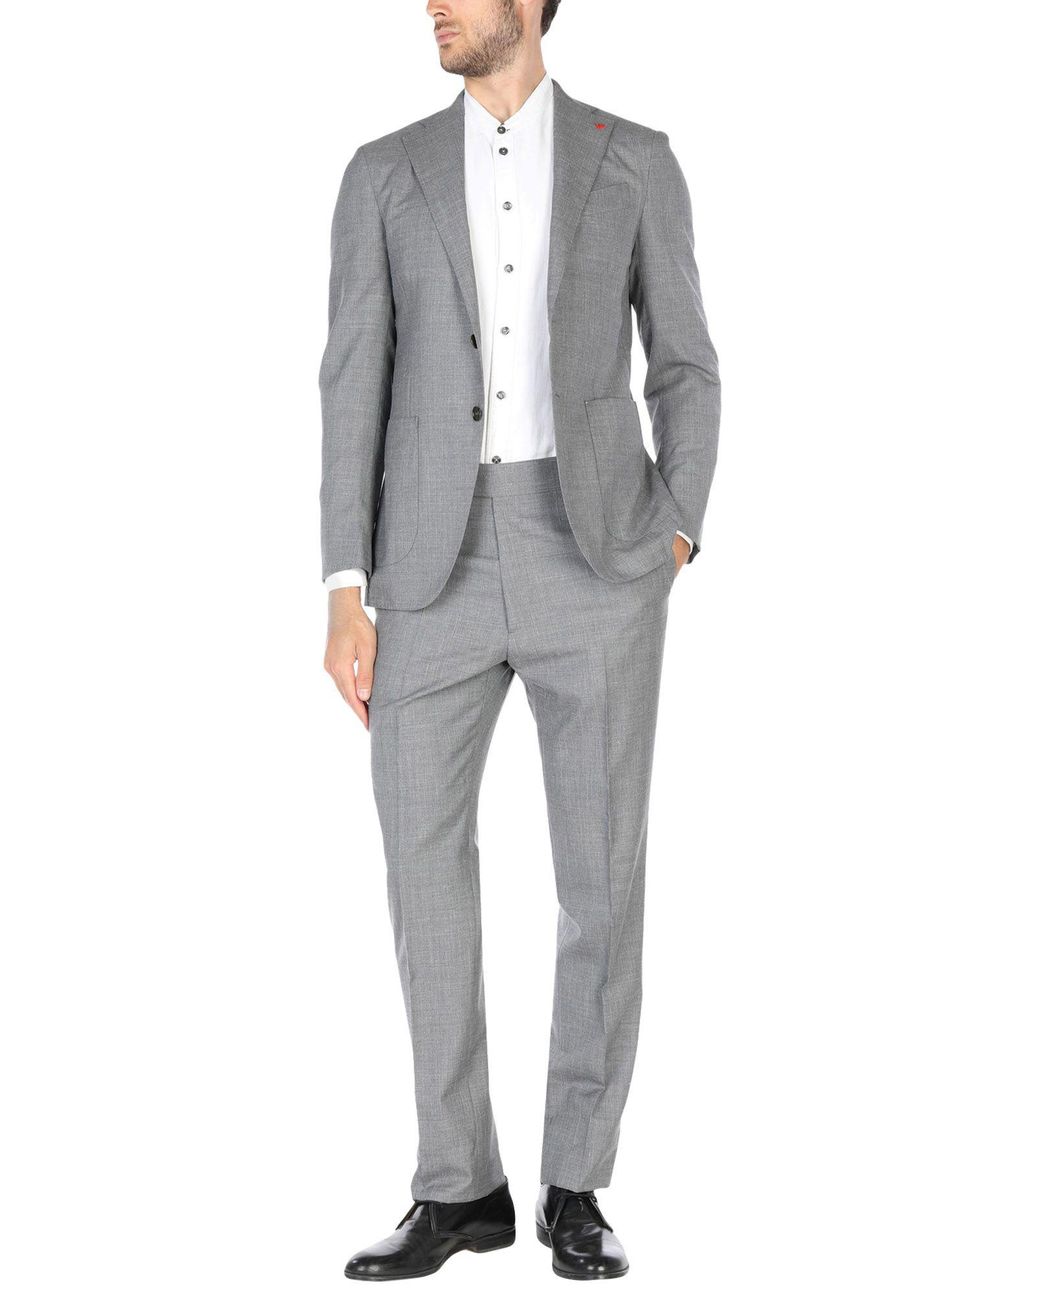 Isaia Wool Suit in Gray for Men - Lyst